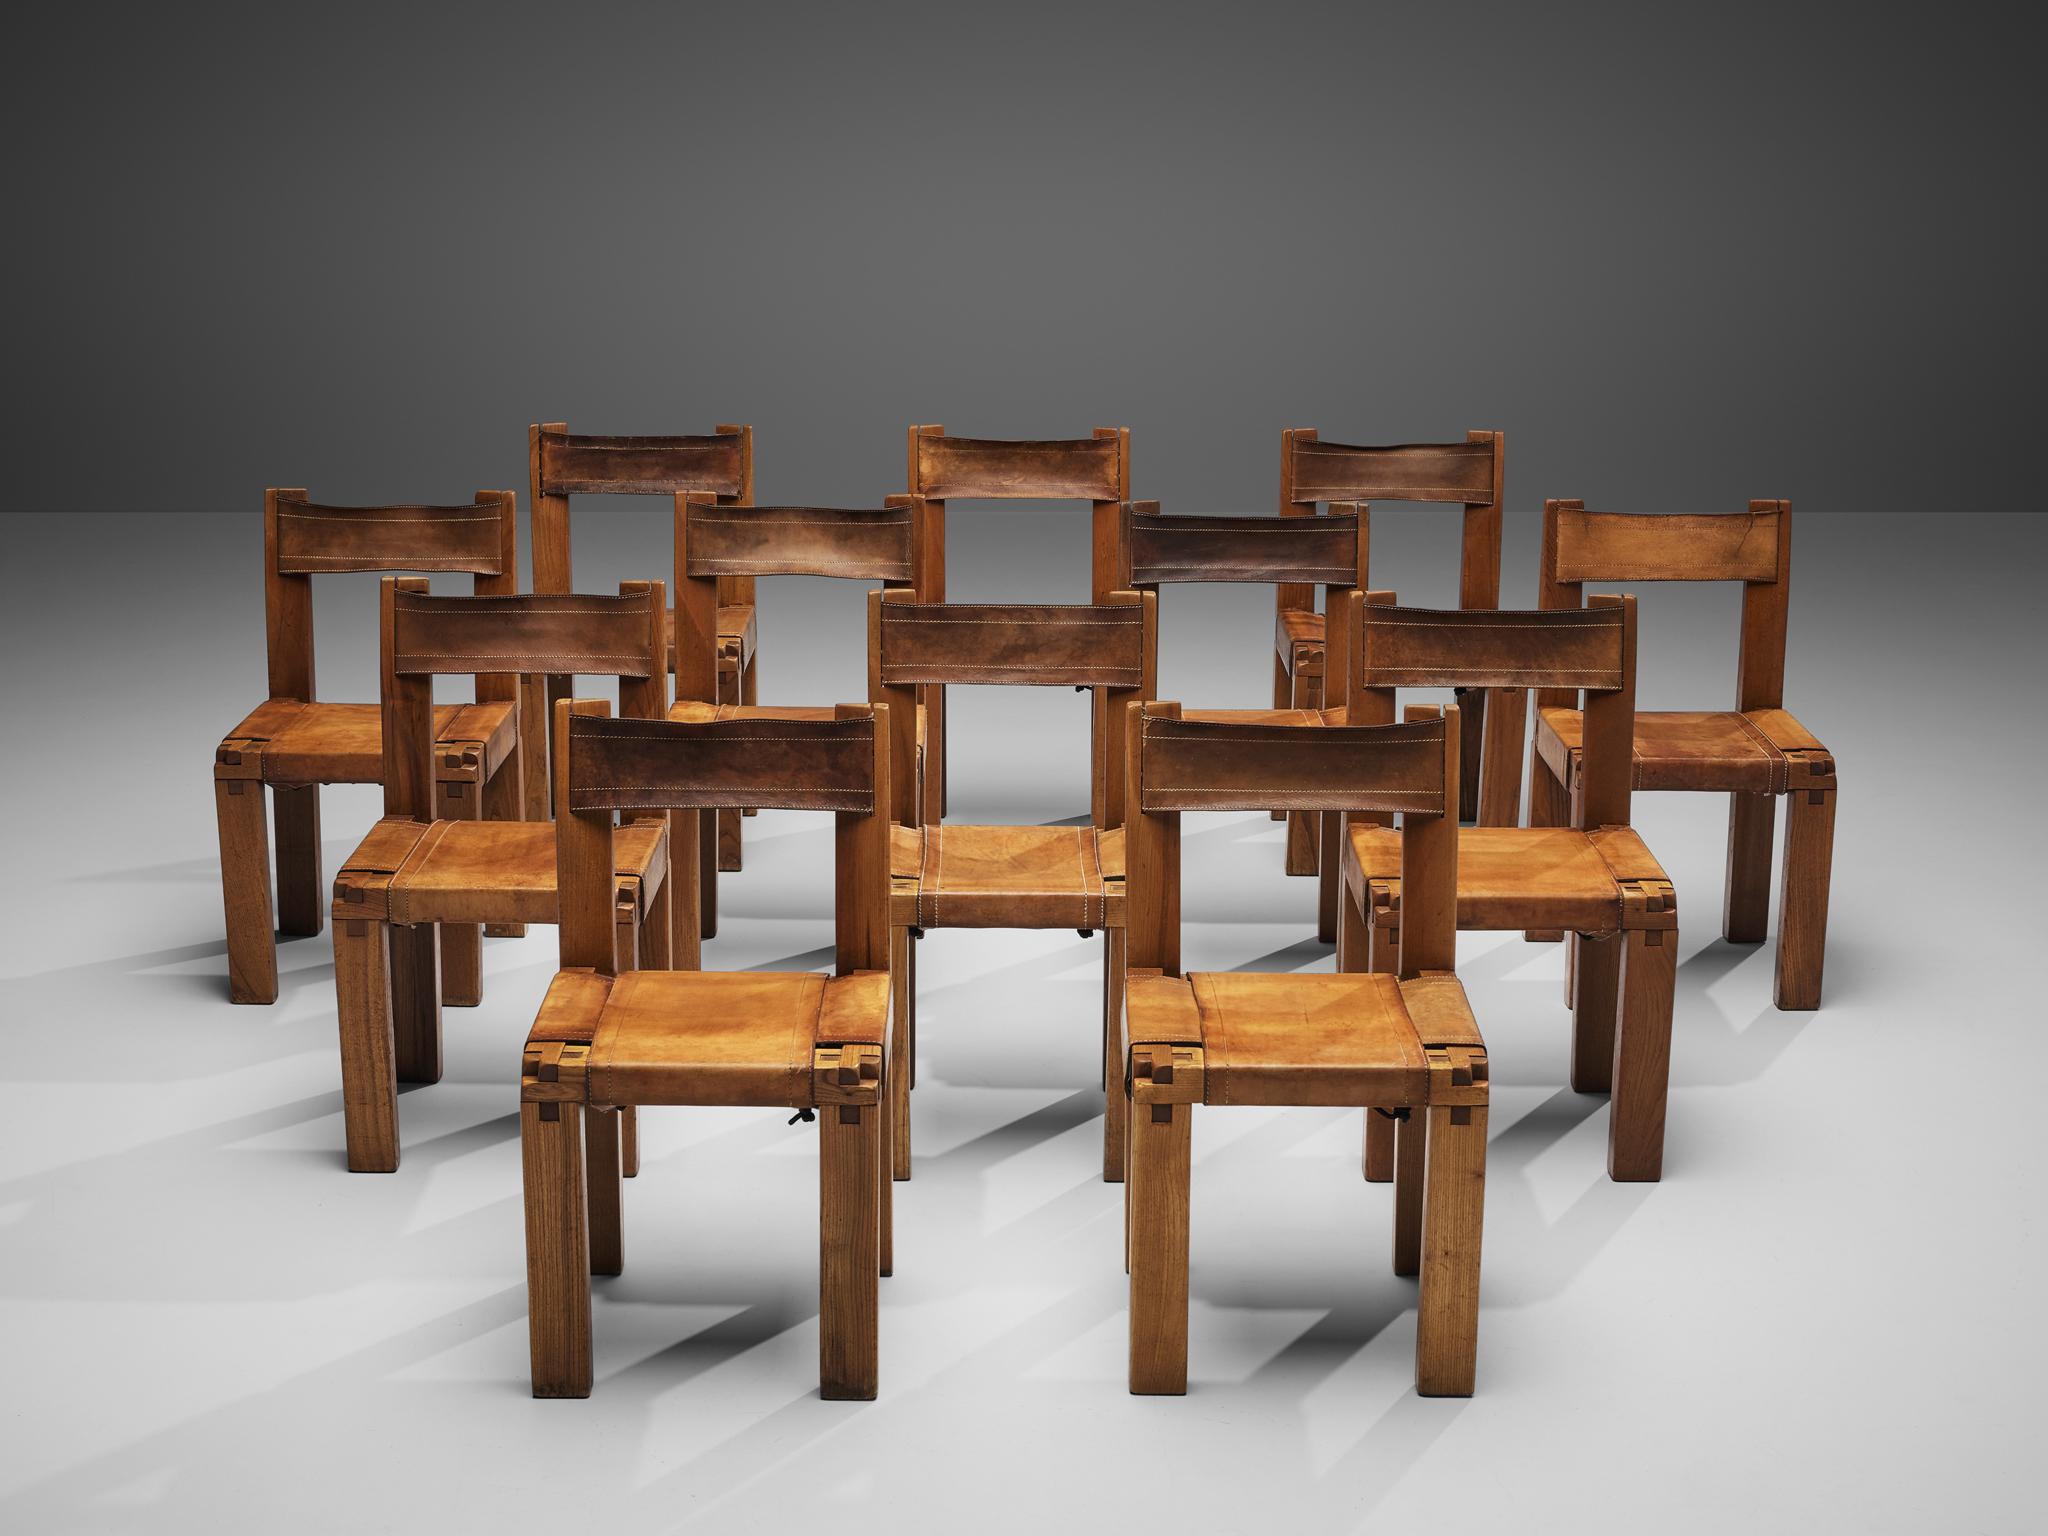 Pierre Chapo, set of twelve dining chairs, model S11, elm and leather, France, circa 1966

A set of twelve chairs in solid elmwood with cognac leather seating and back, designed by French designer Pierre Chapo. These chairs have a cubic design of